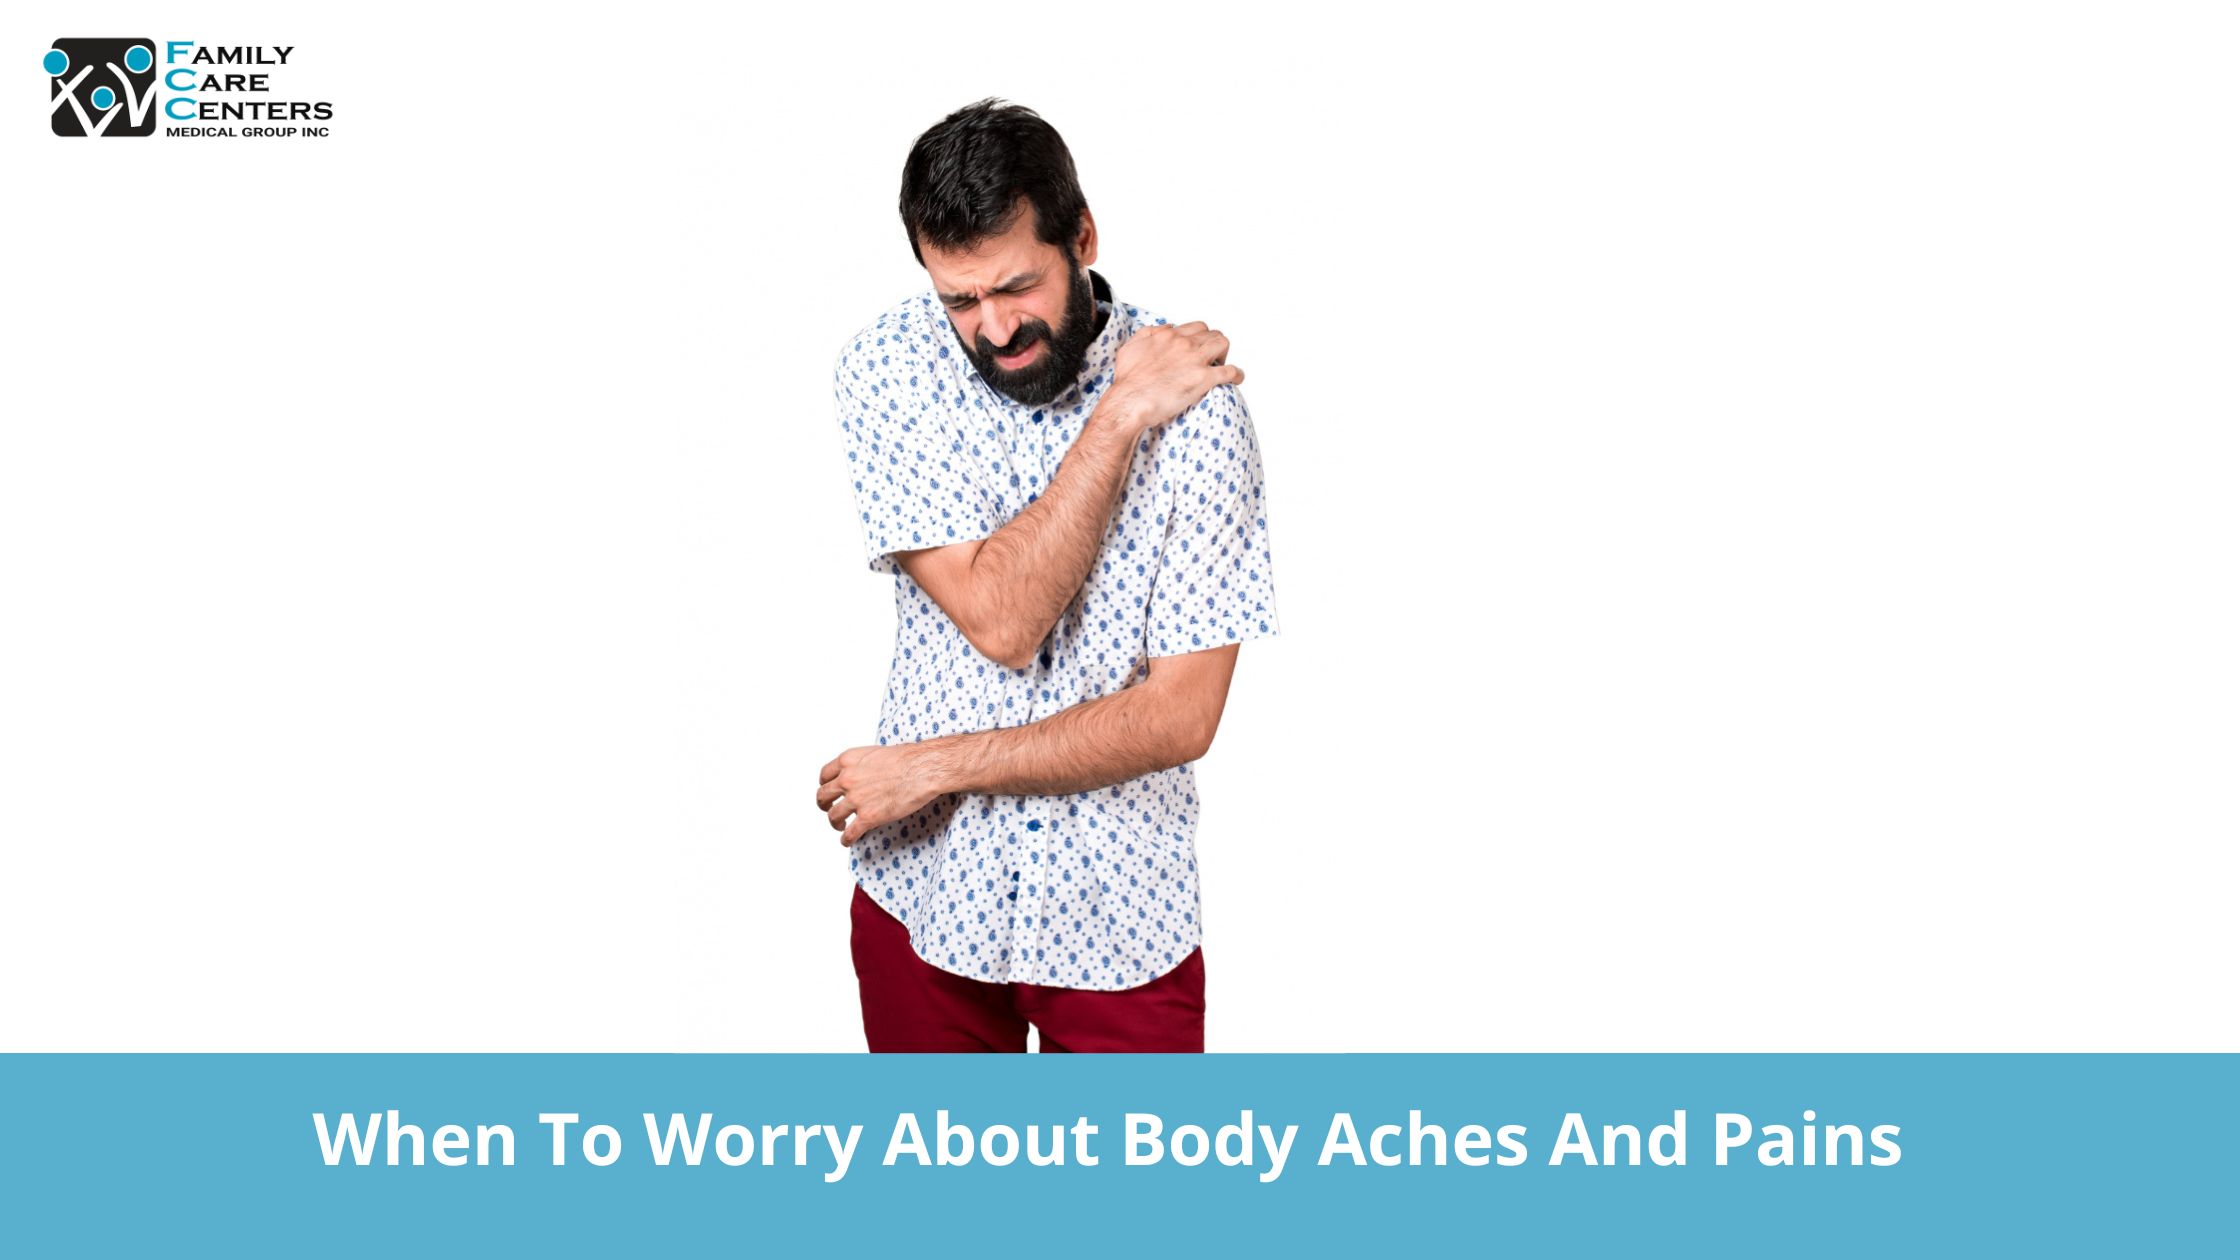 When to Worry About Body Aches and Pains